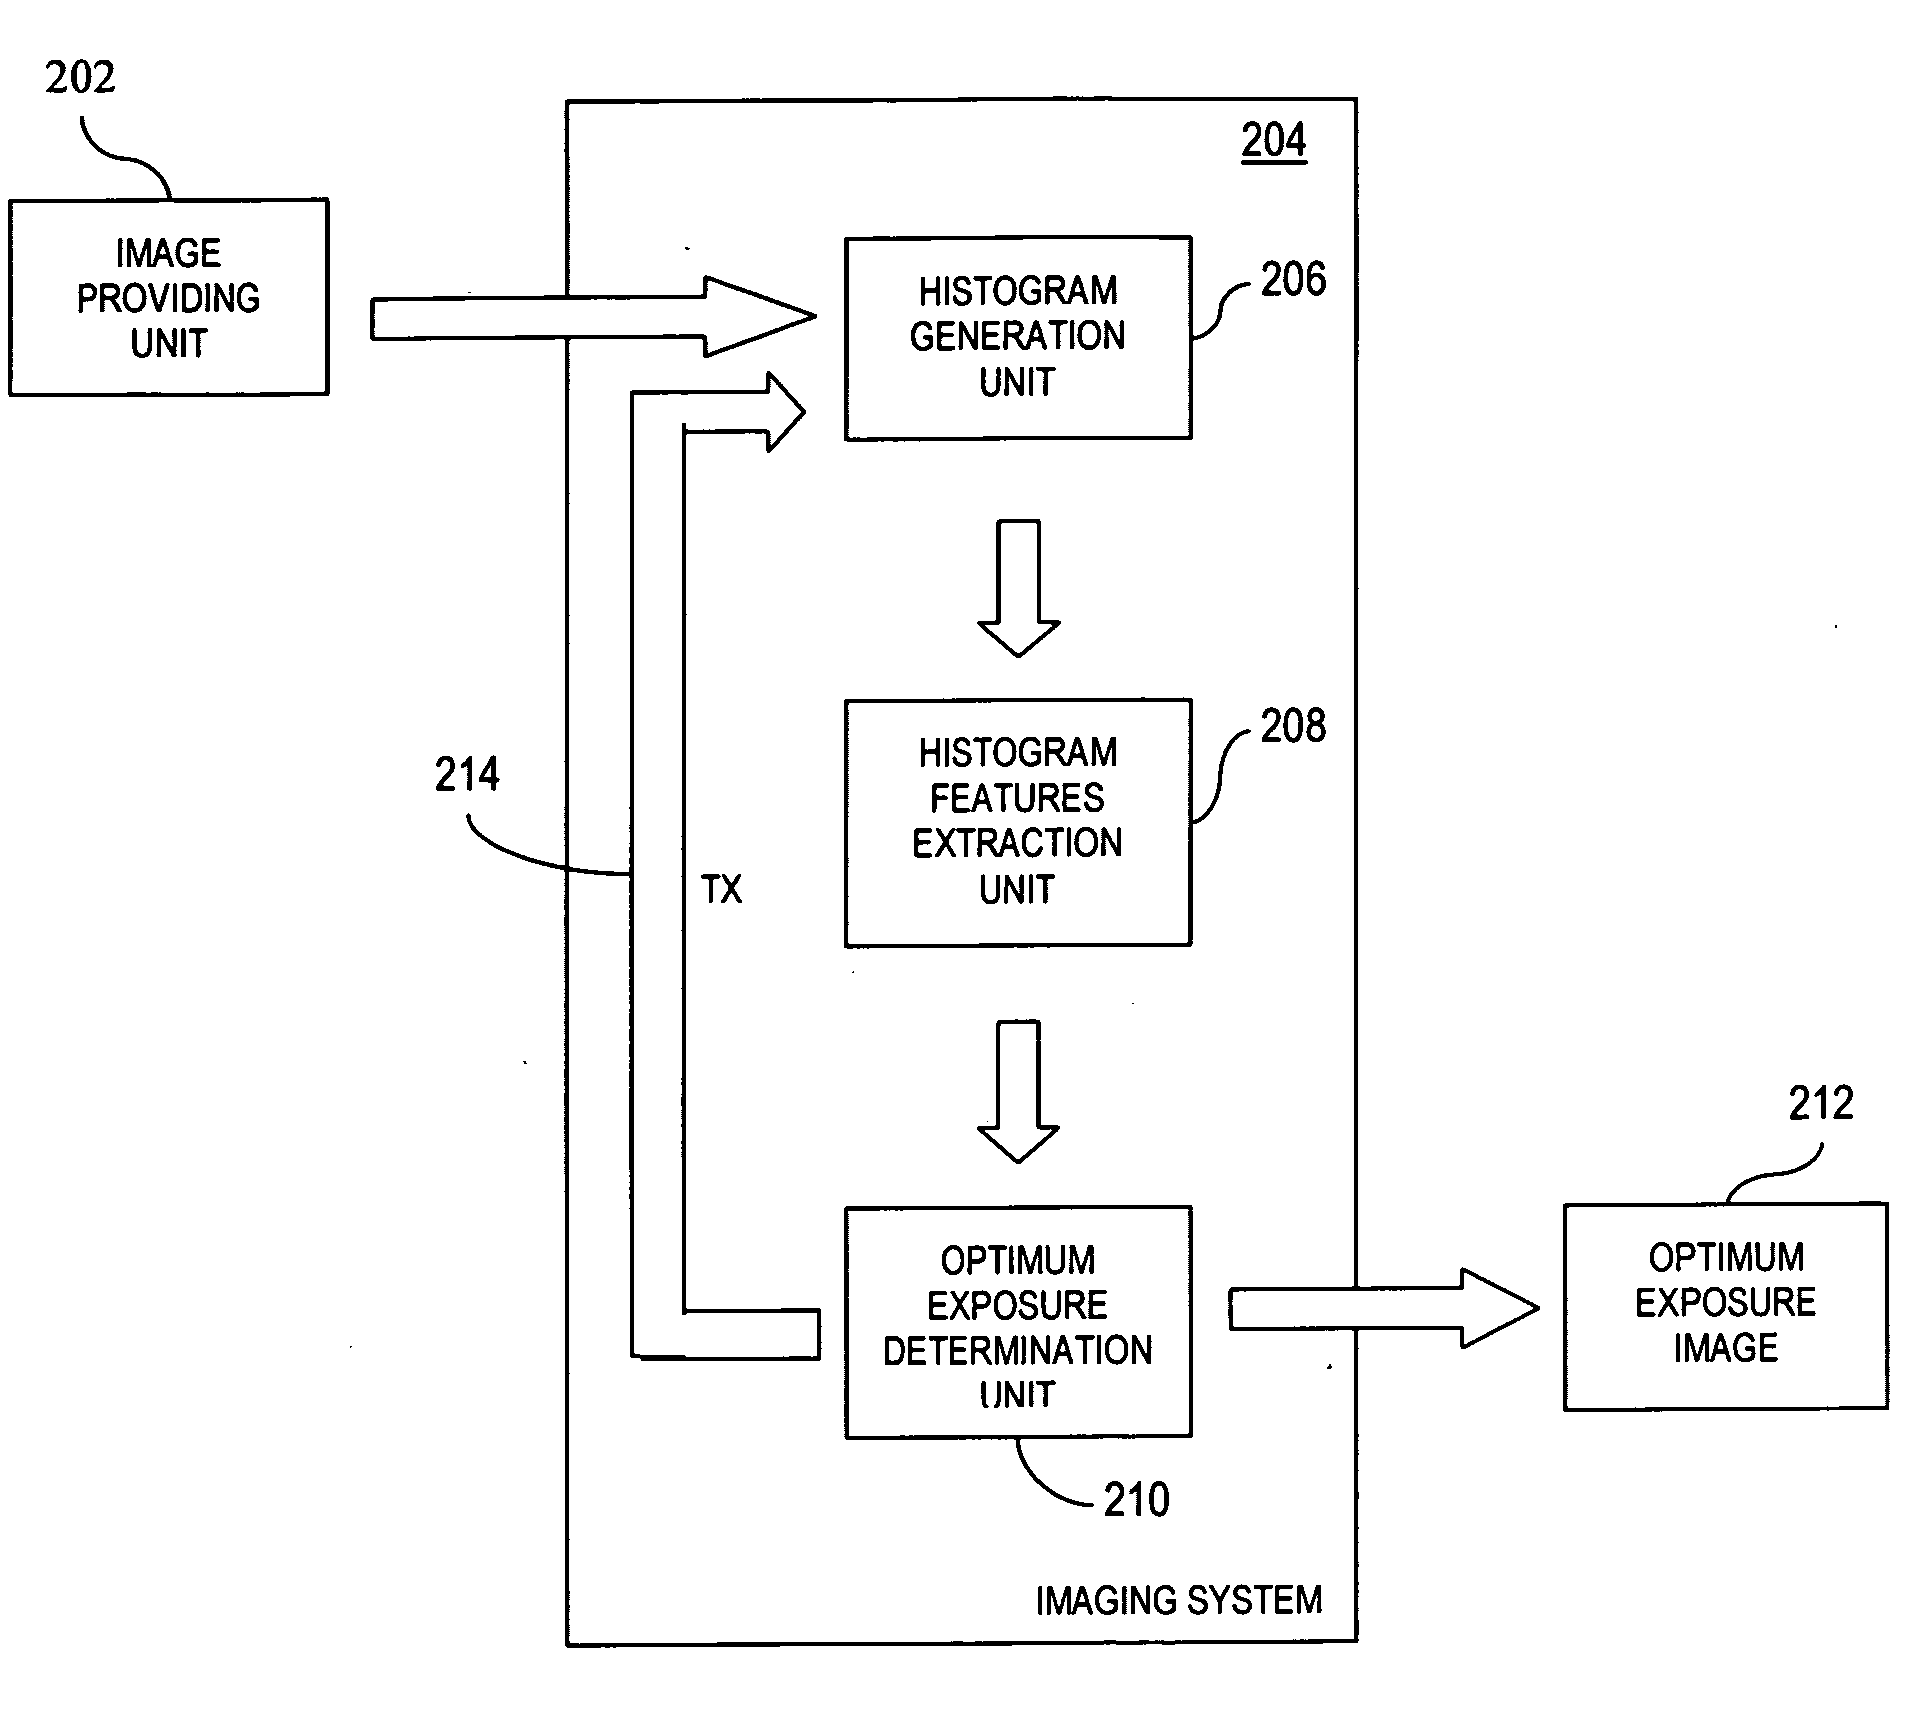 Exposure control for an imaging system